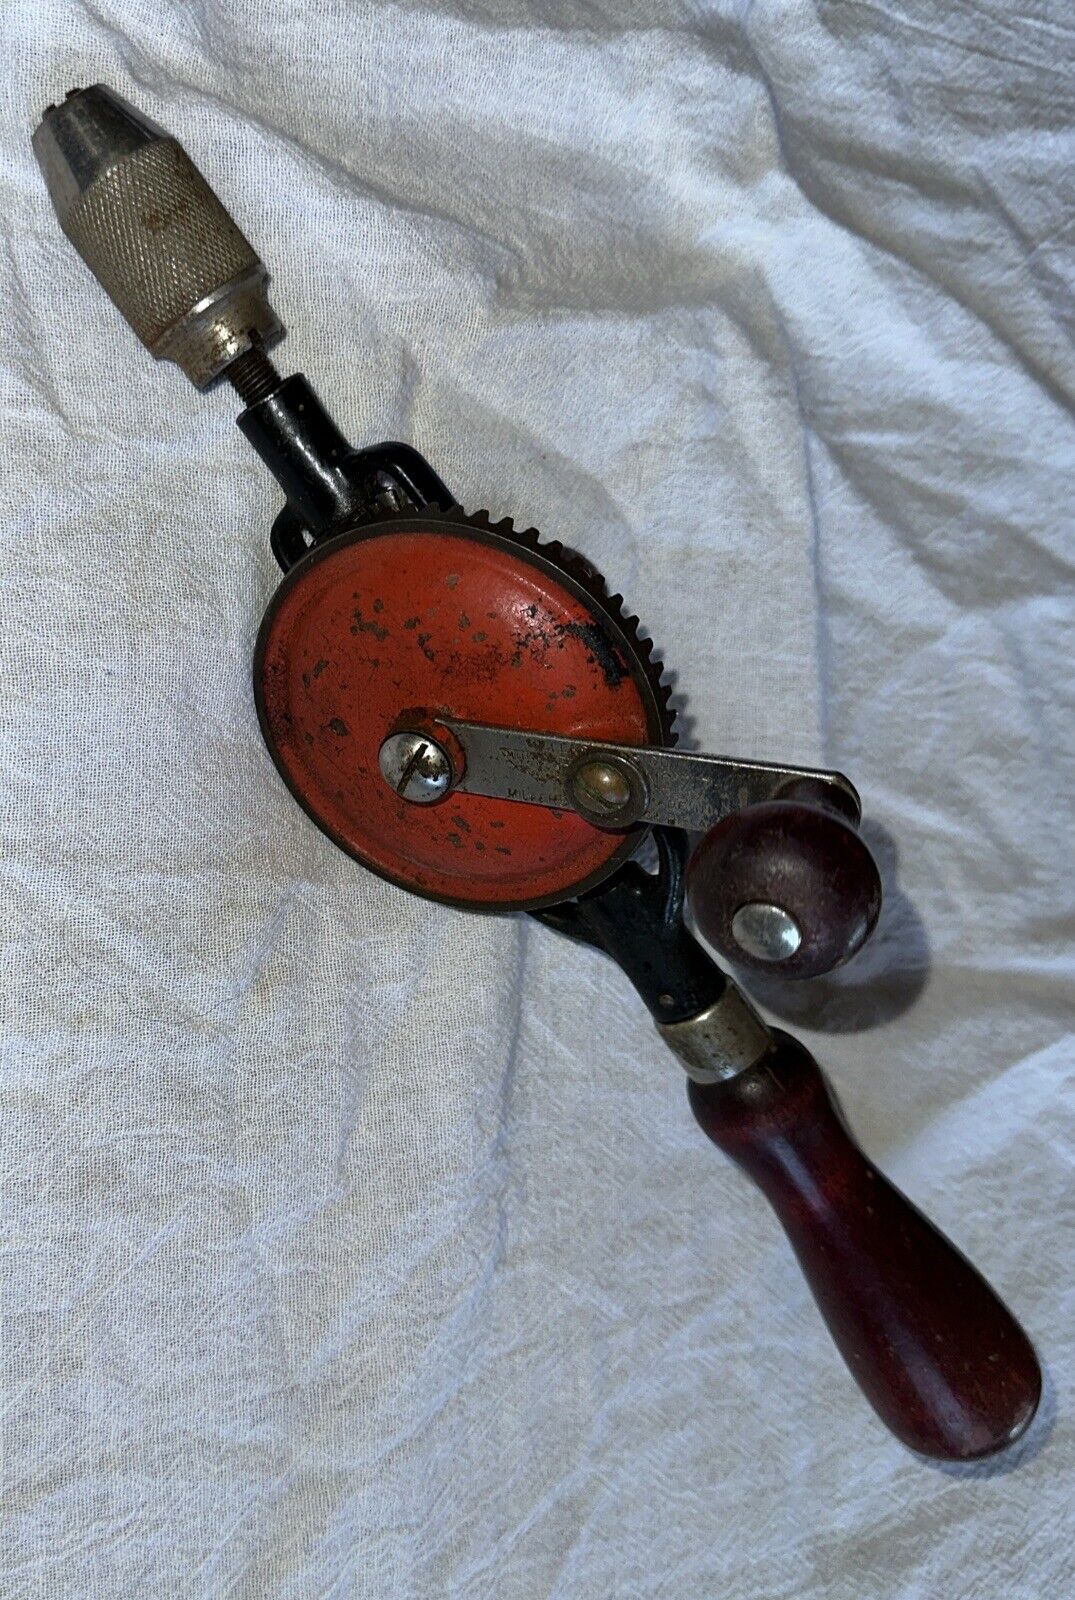 Millers Falls No. 77 “Egg Beater” Hand Drill